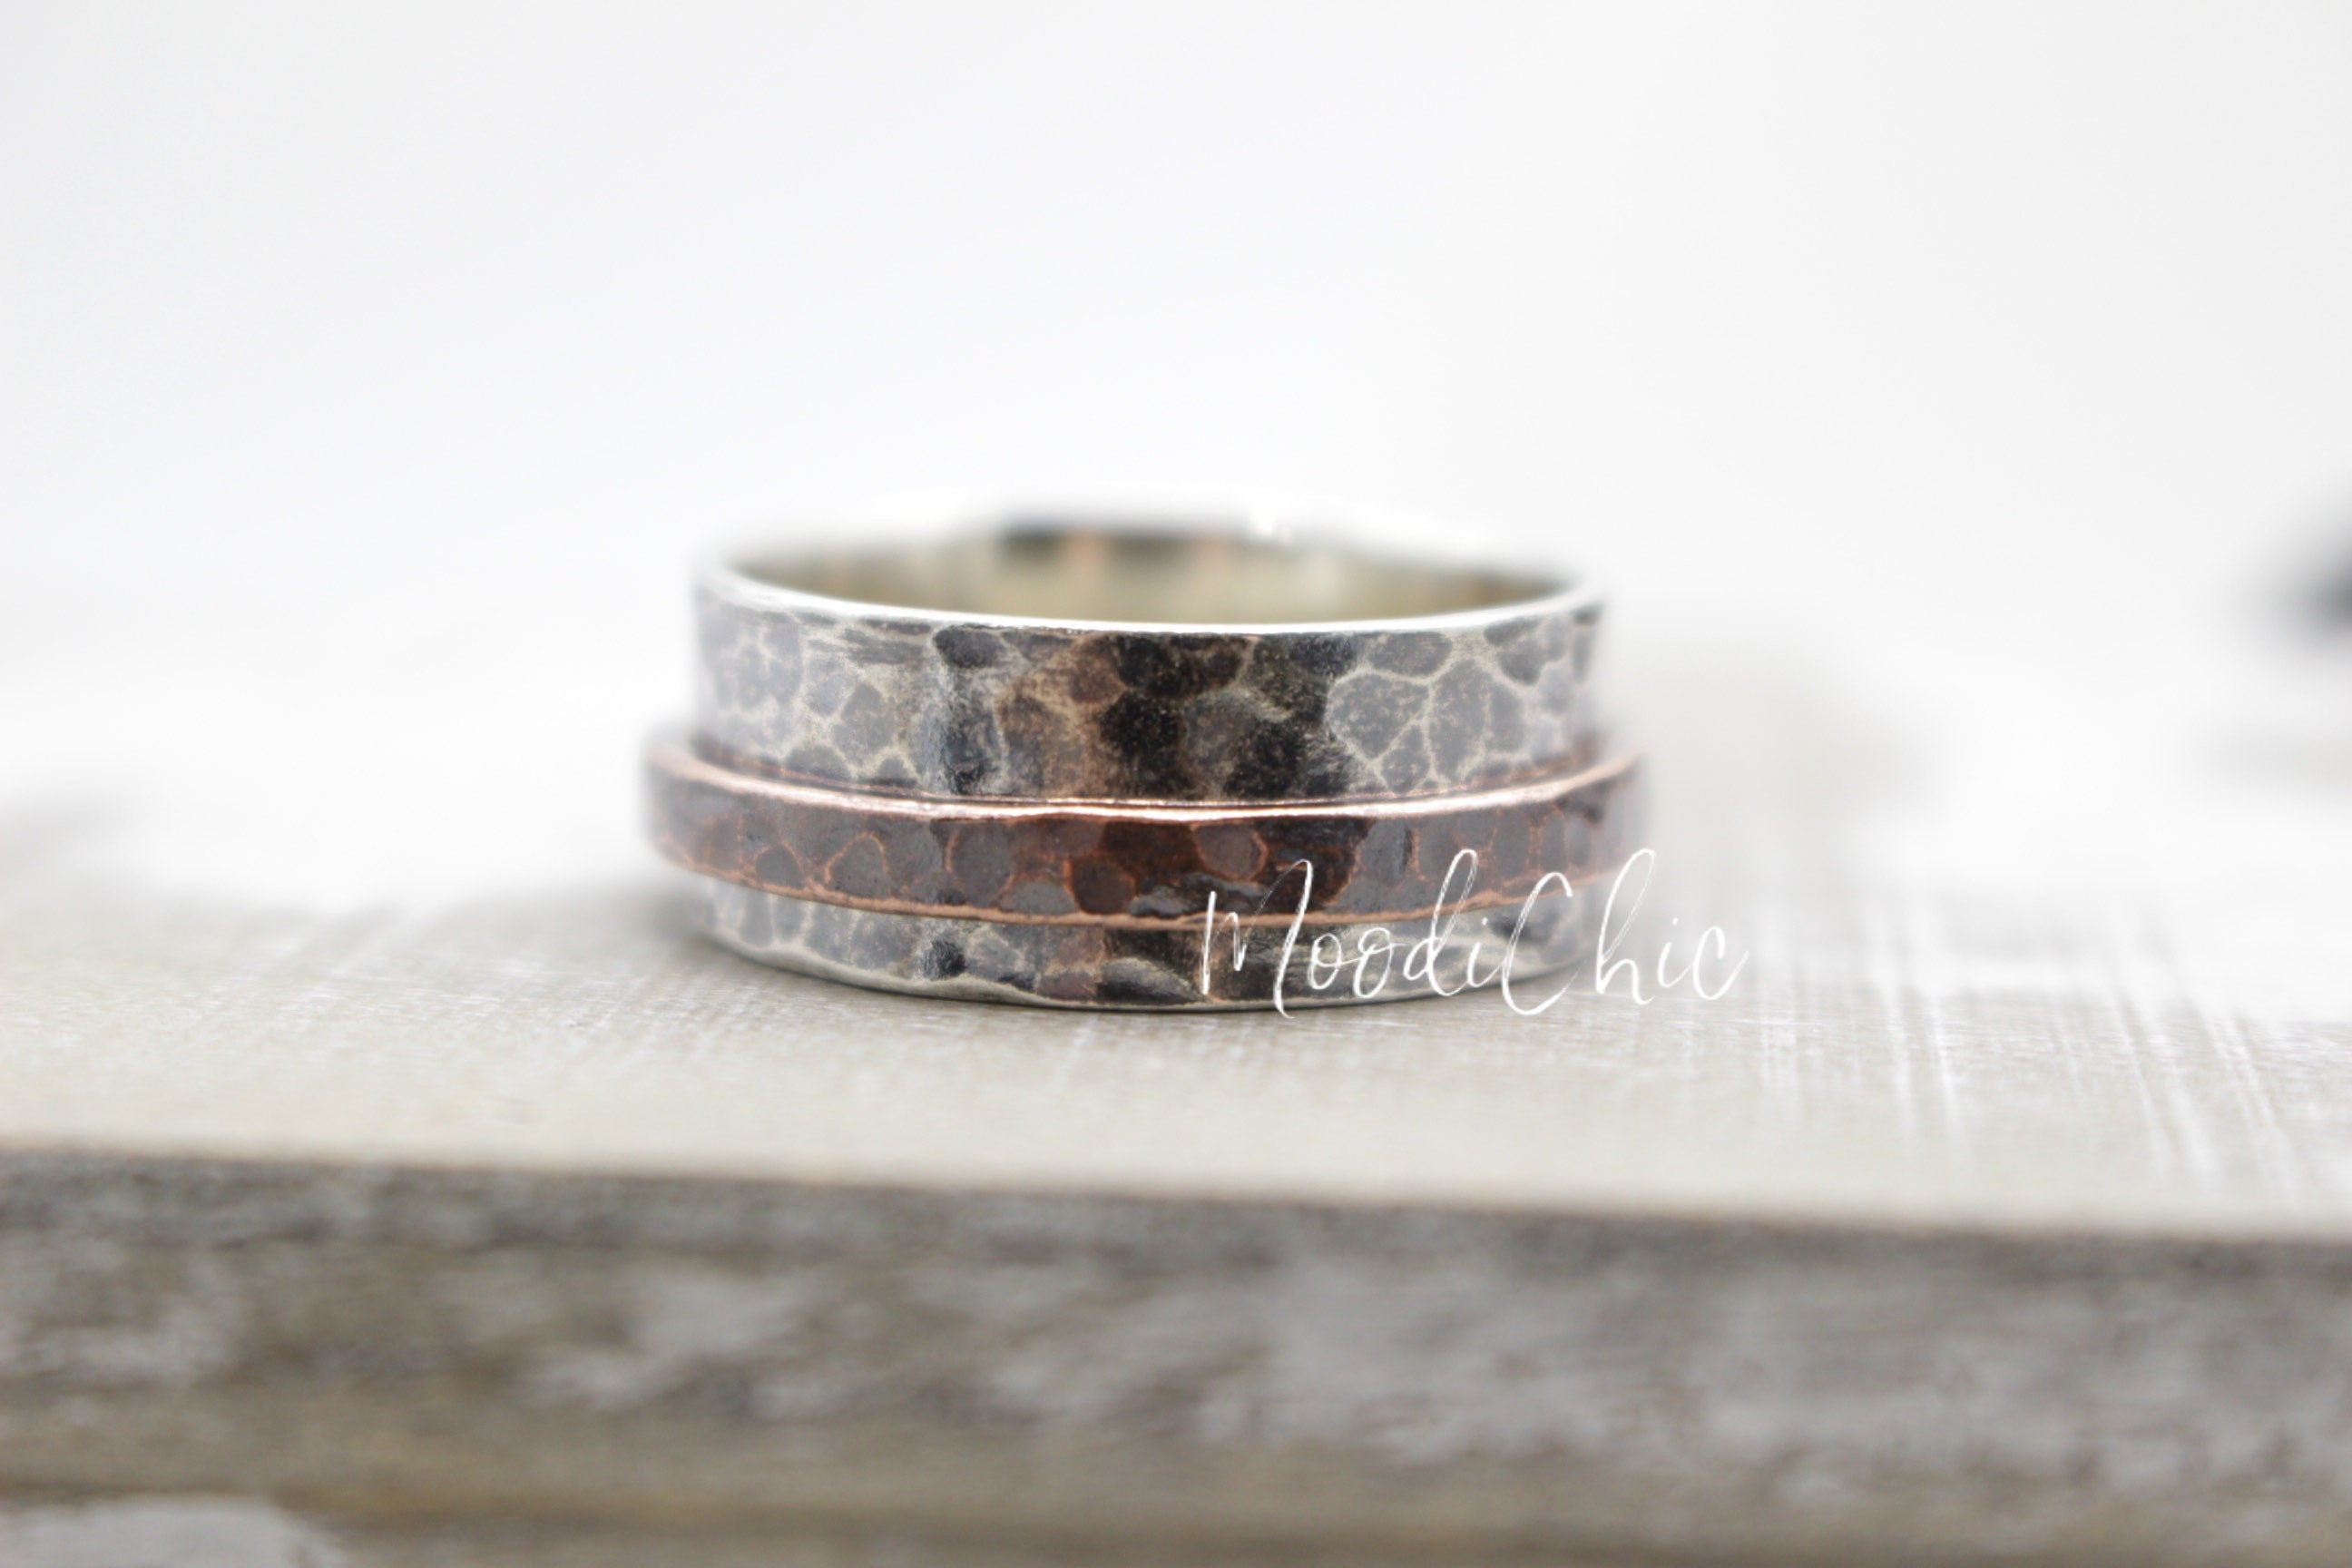 Rustic Copper spinner ring - Wide band Ring - Unisex Meditation Ring - Gift for her - Gift for him - Jewelry Sale